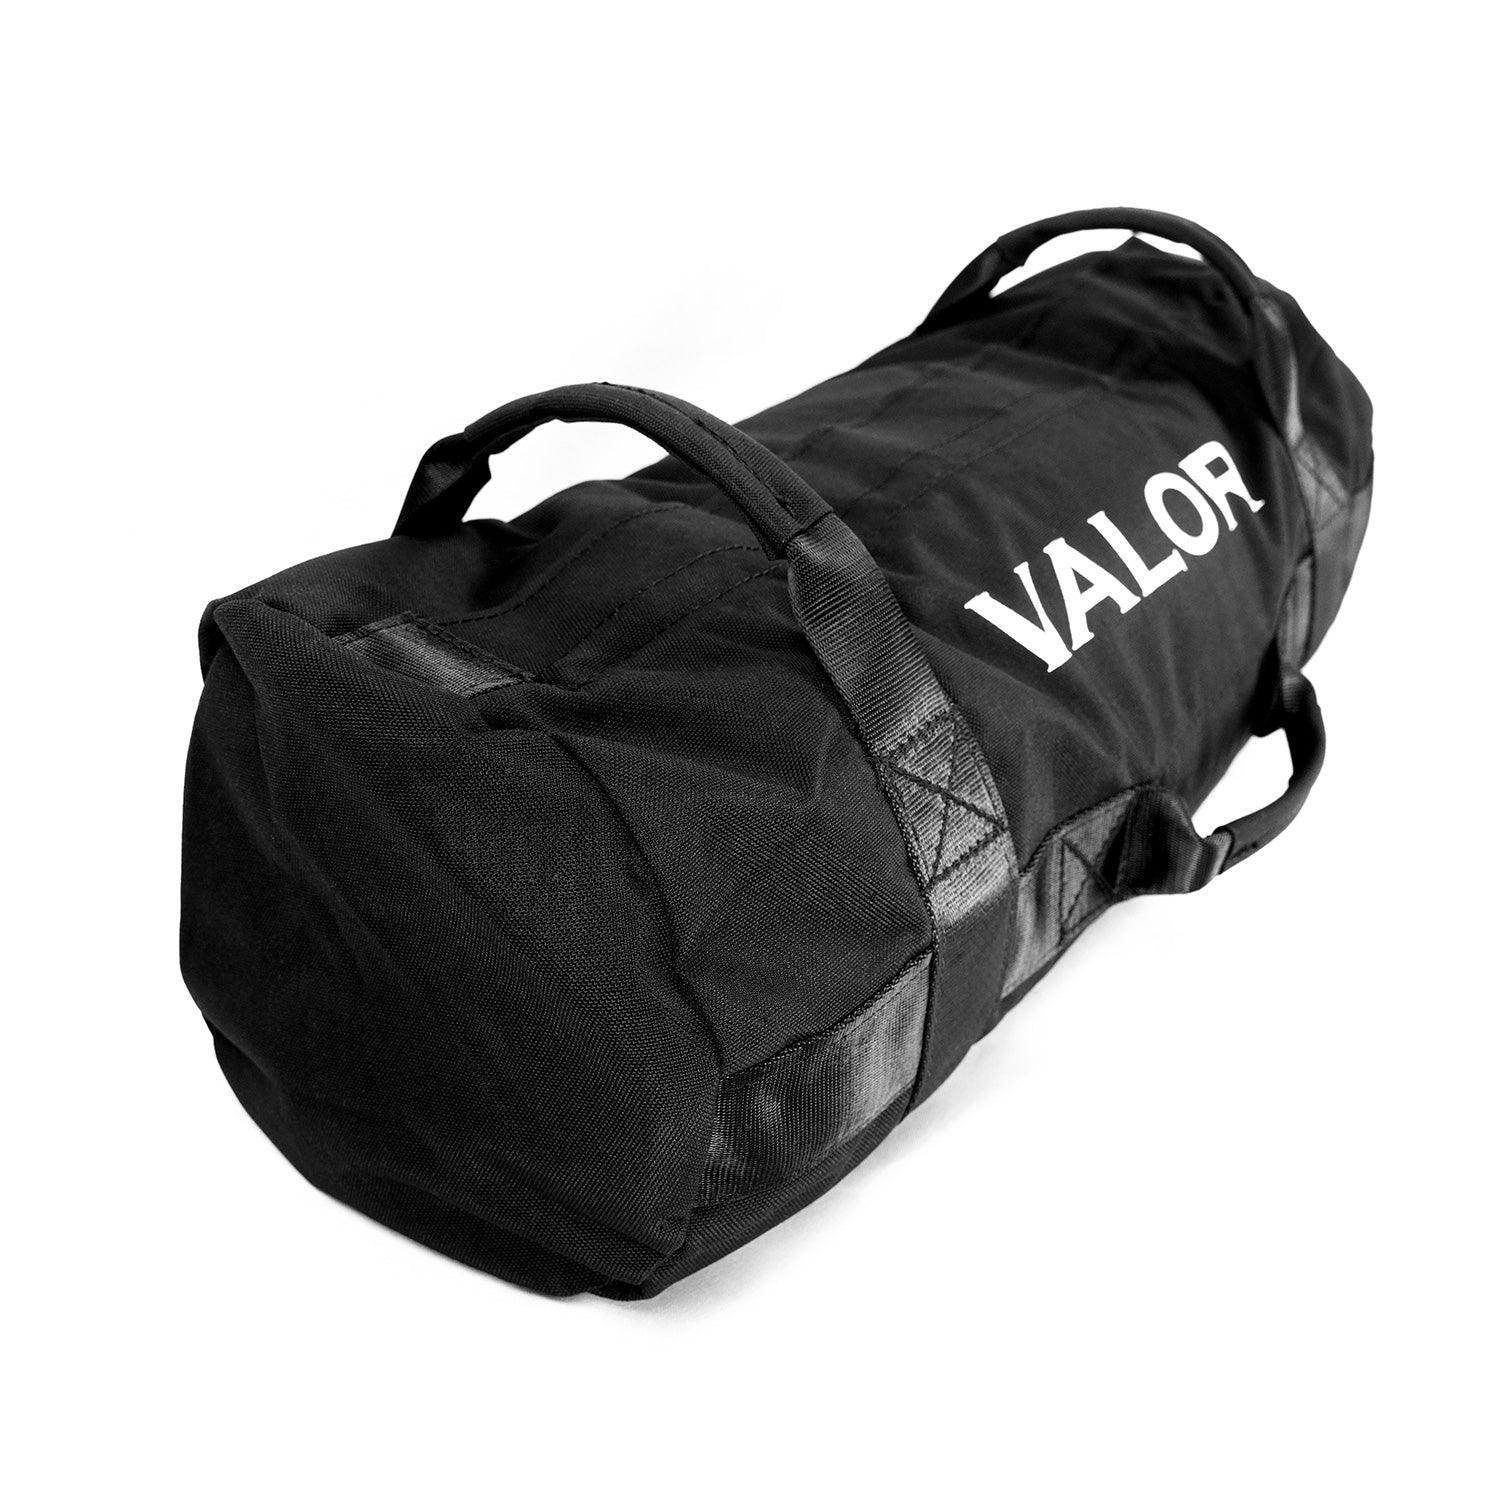  Heavy Duty Sandbag - Workout Bag with Handles for Weight  Training - for Weighted Exercise, Home Fitness and More - Gym Accessories  for Men and Women : Sports & Outdoors